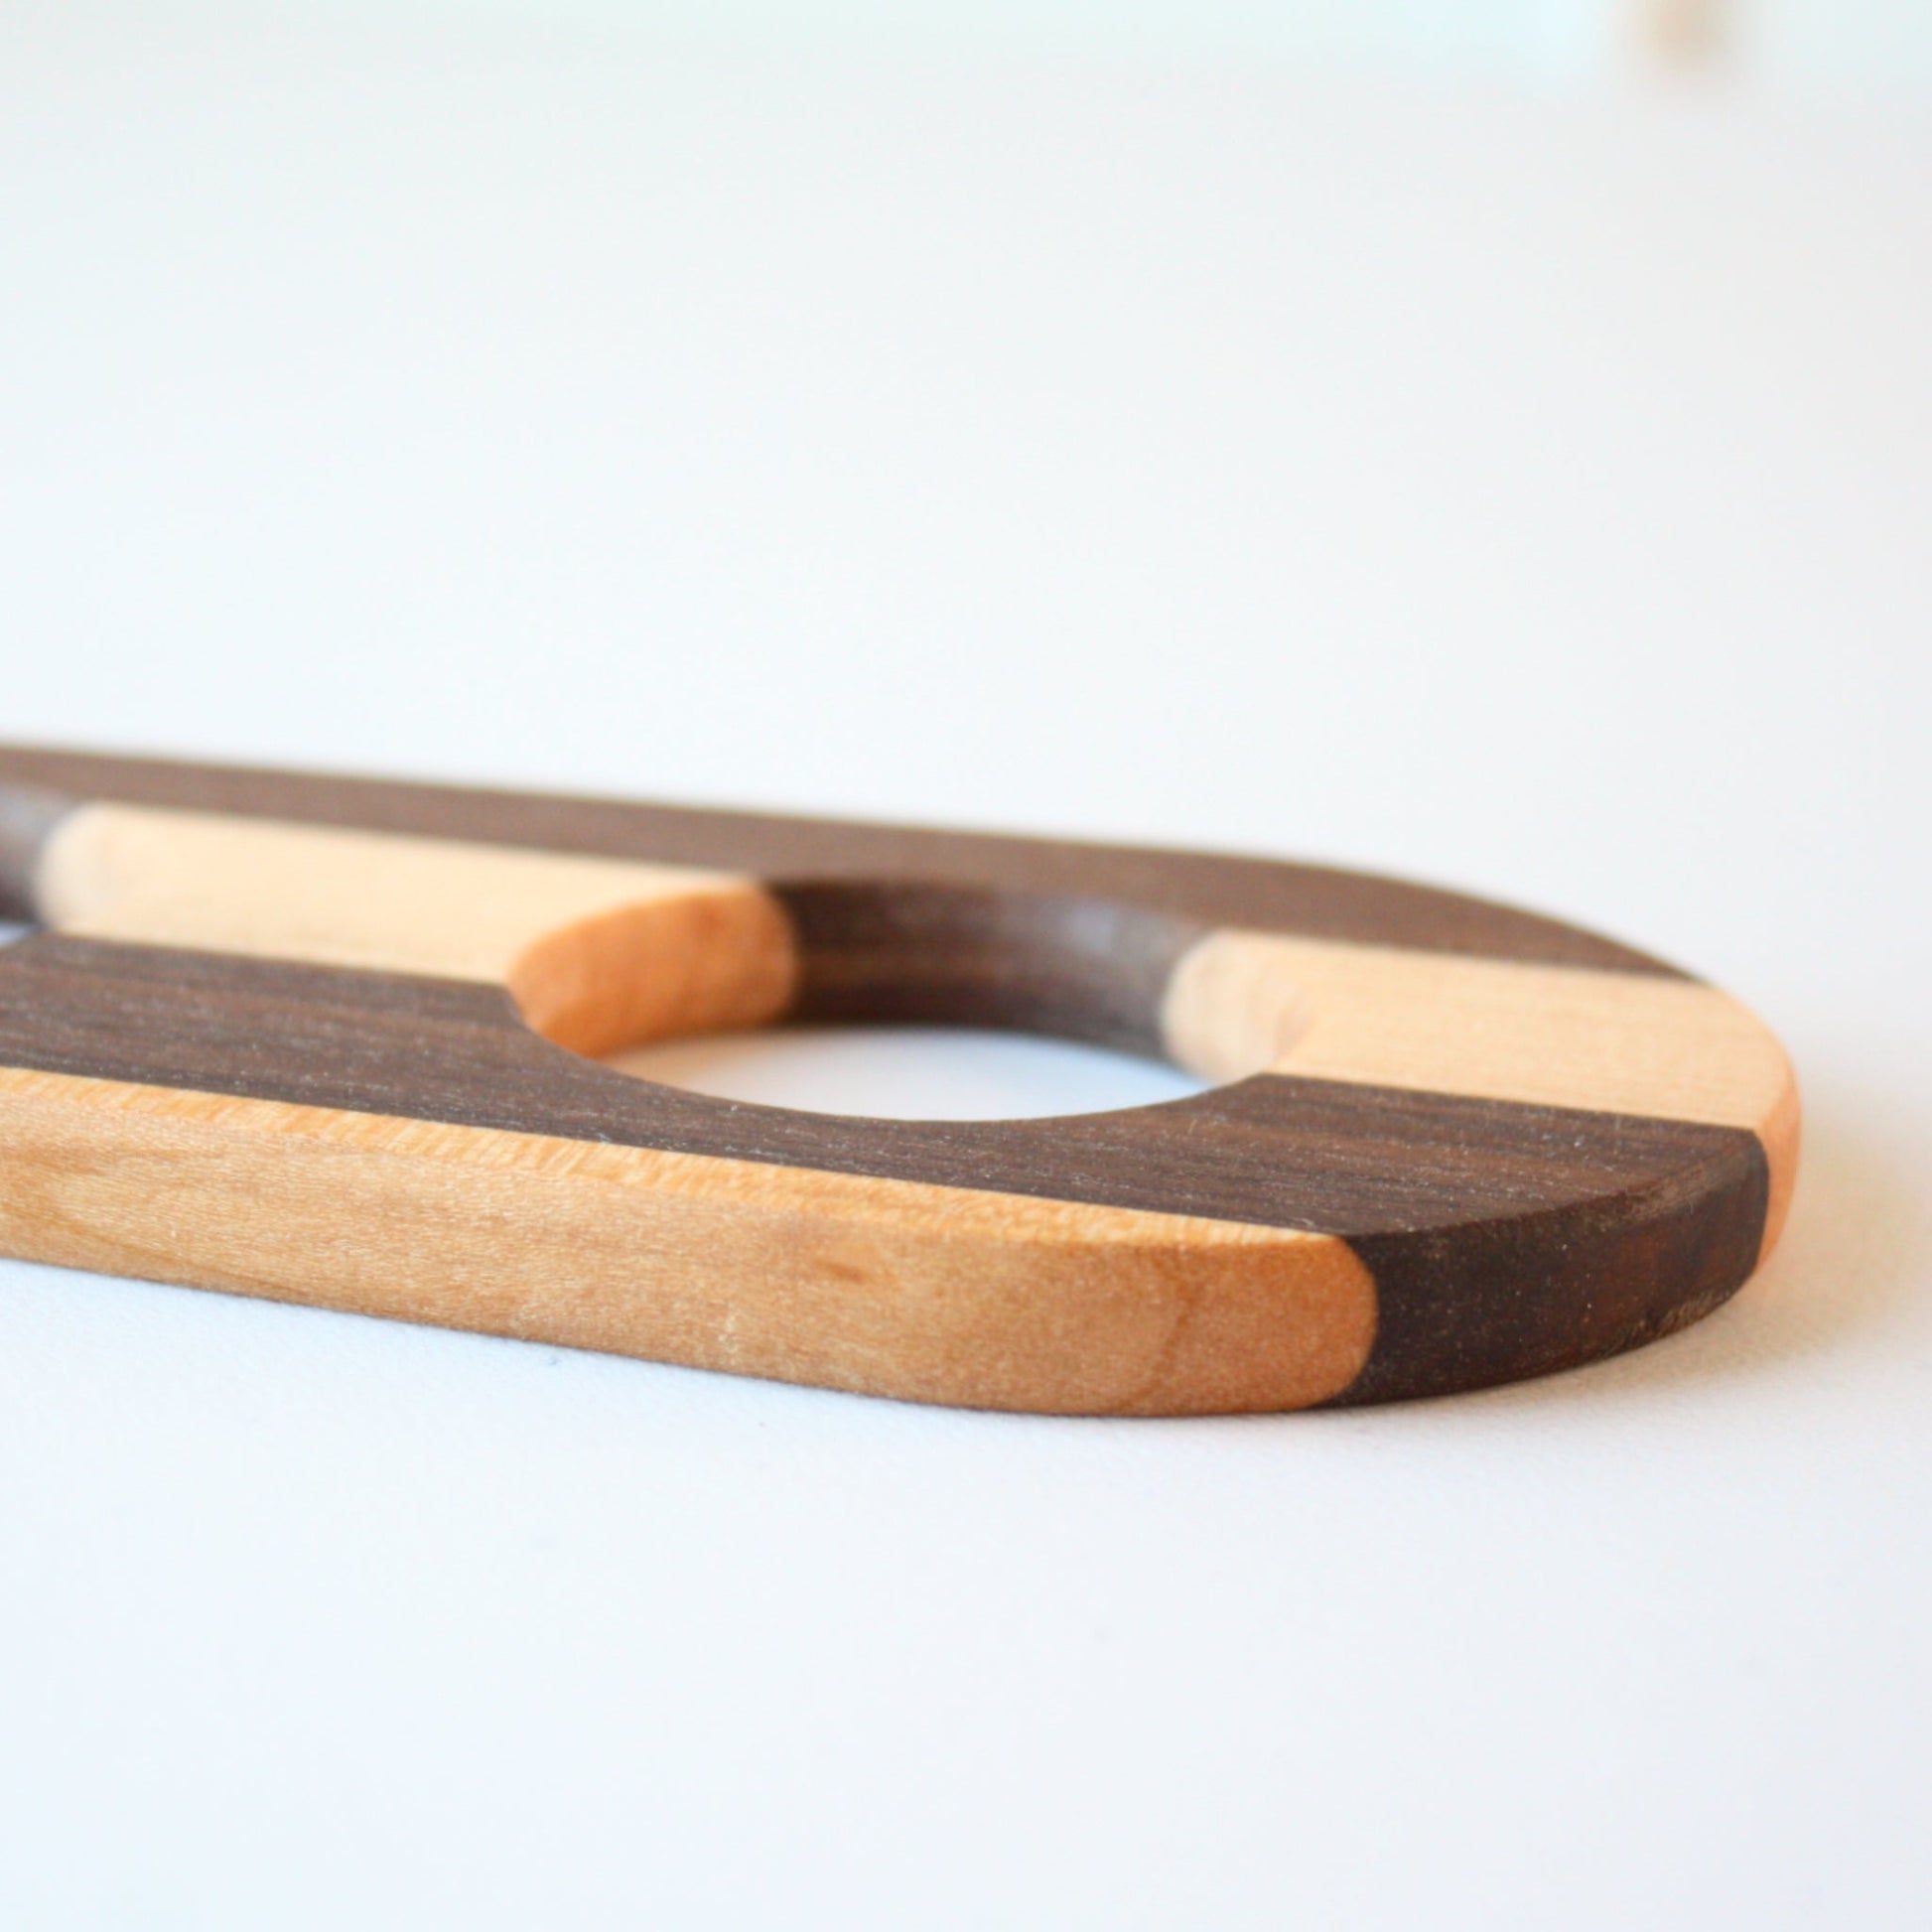 Large Handmade Multi Wood Pasta Measurer - Made in the USA